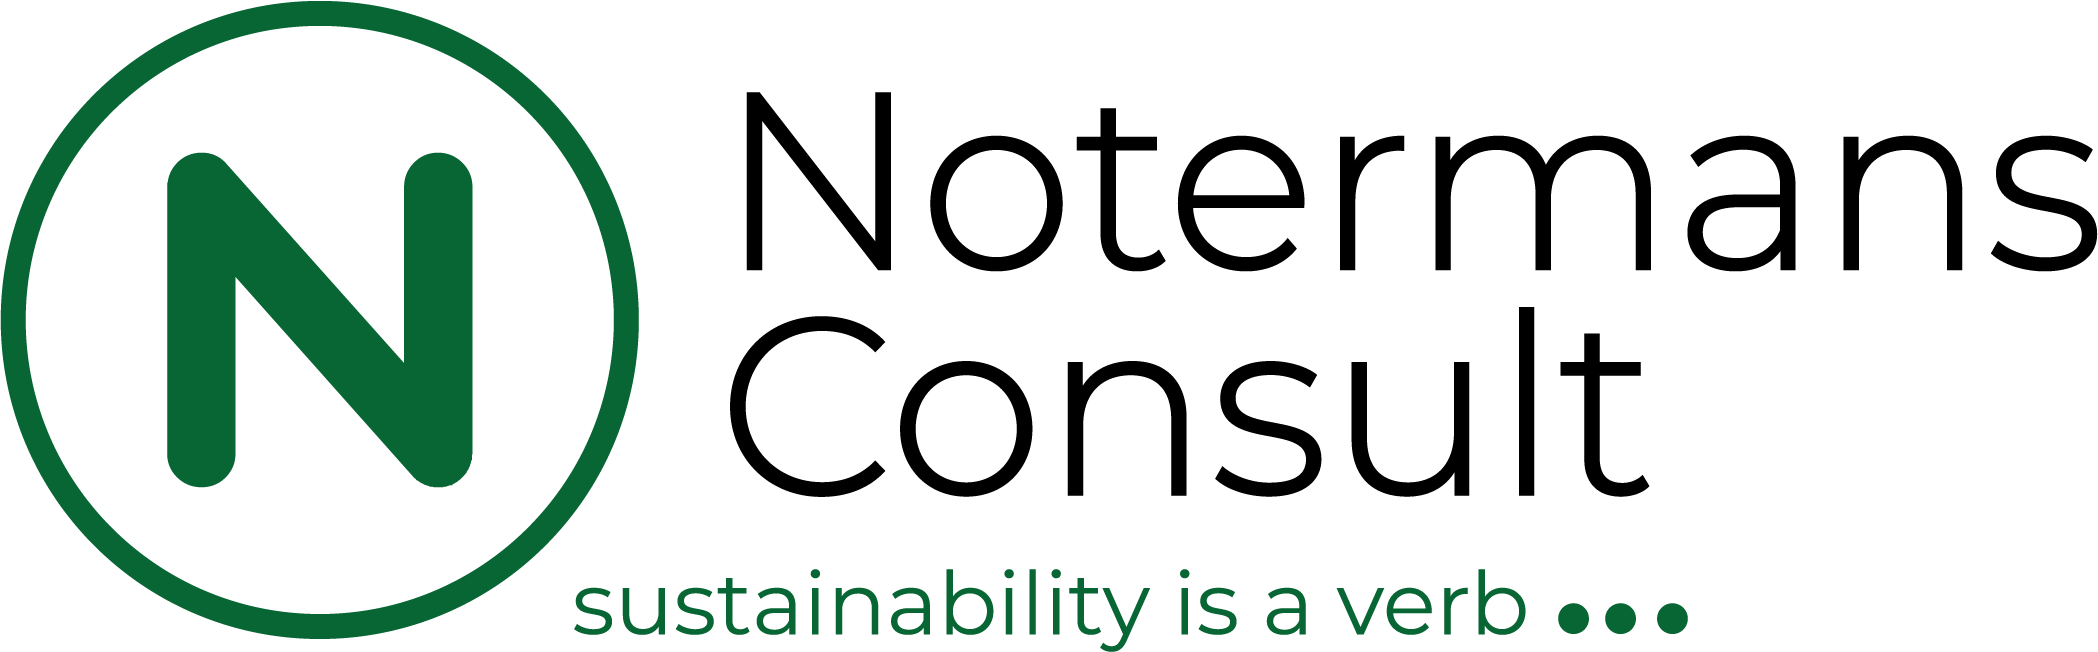 NotermansConsult bv - Sustainability is a verb